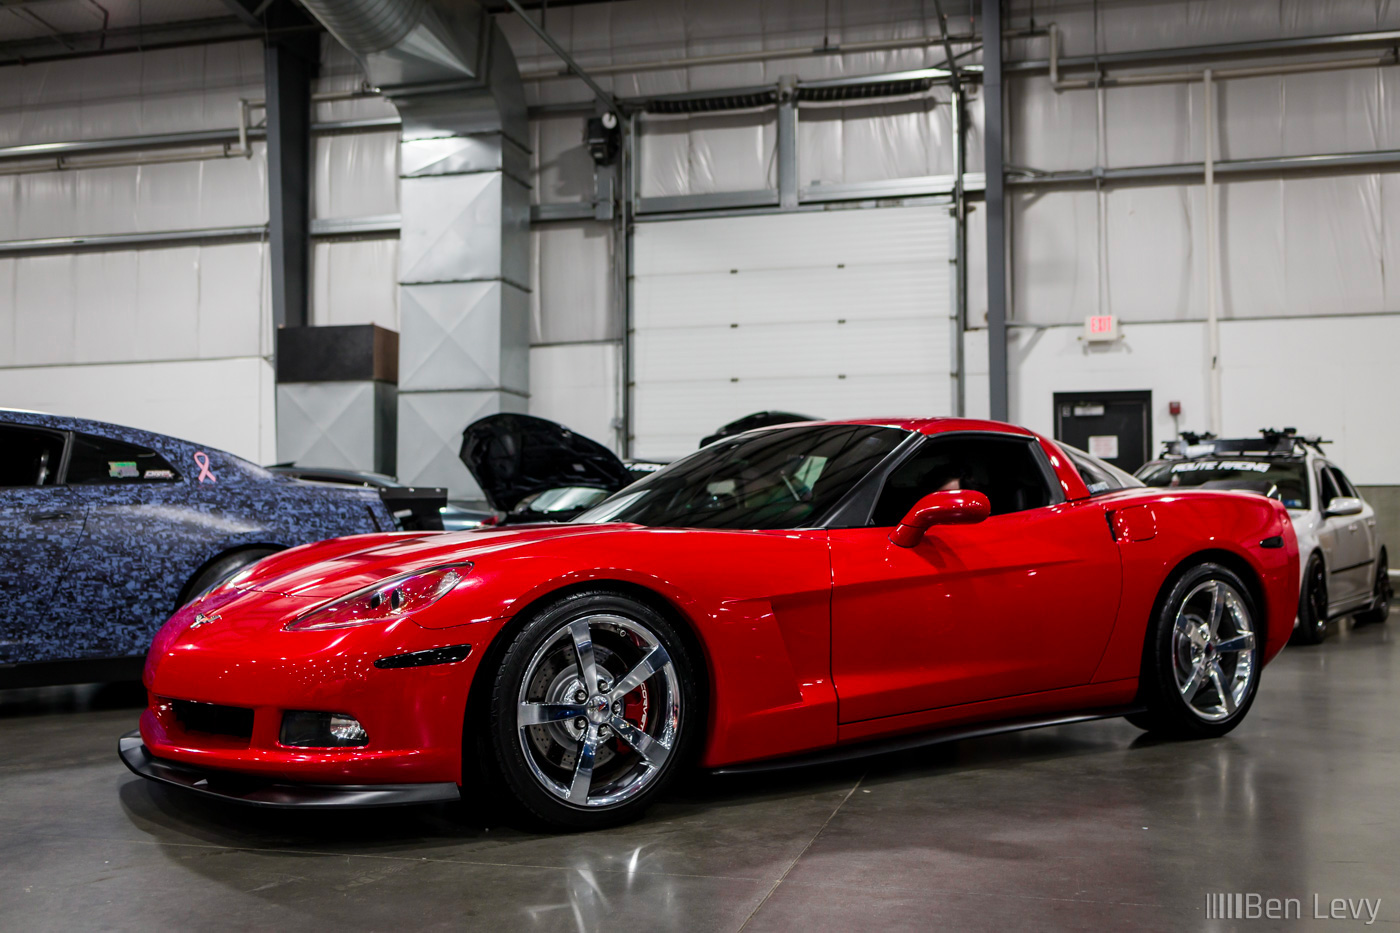 Red C6 Corvette from Cars and Culture Car Show